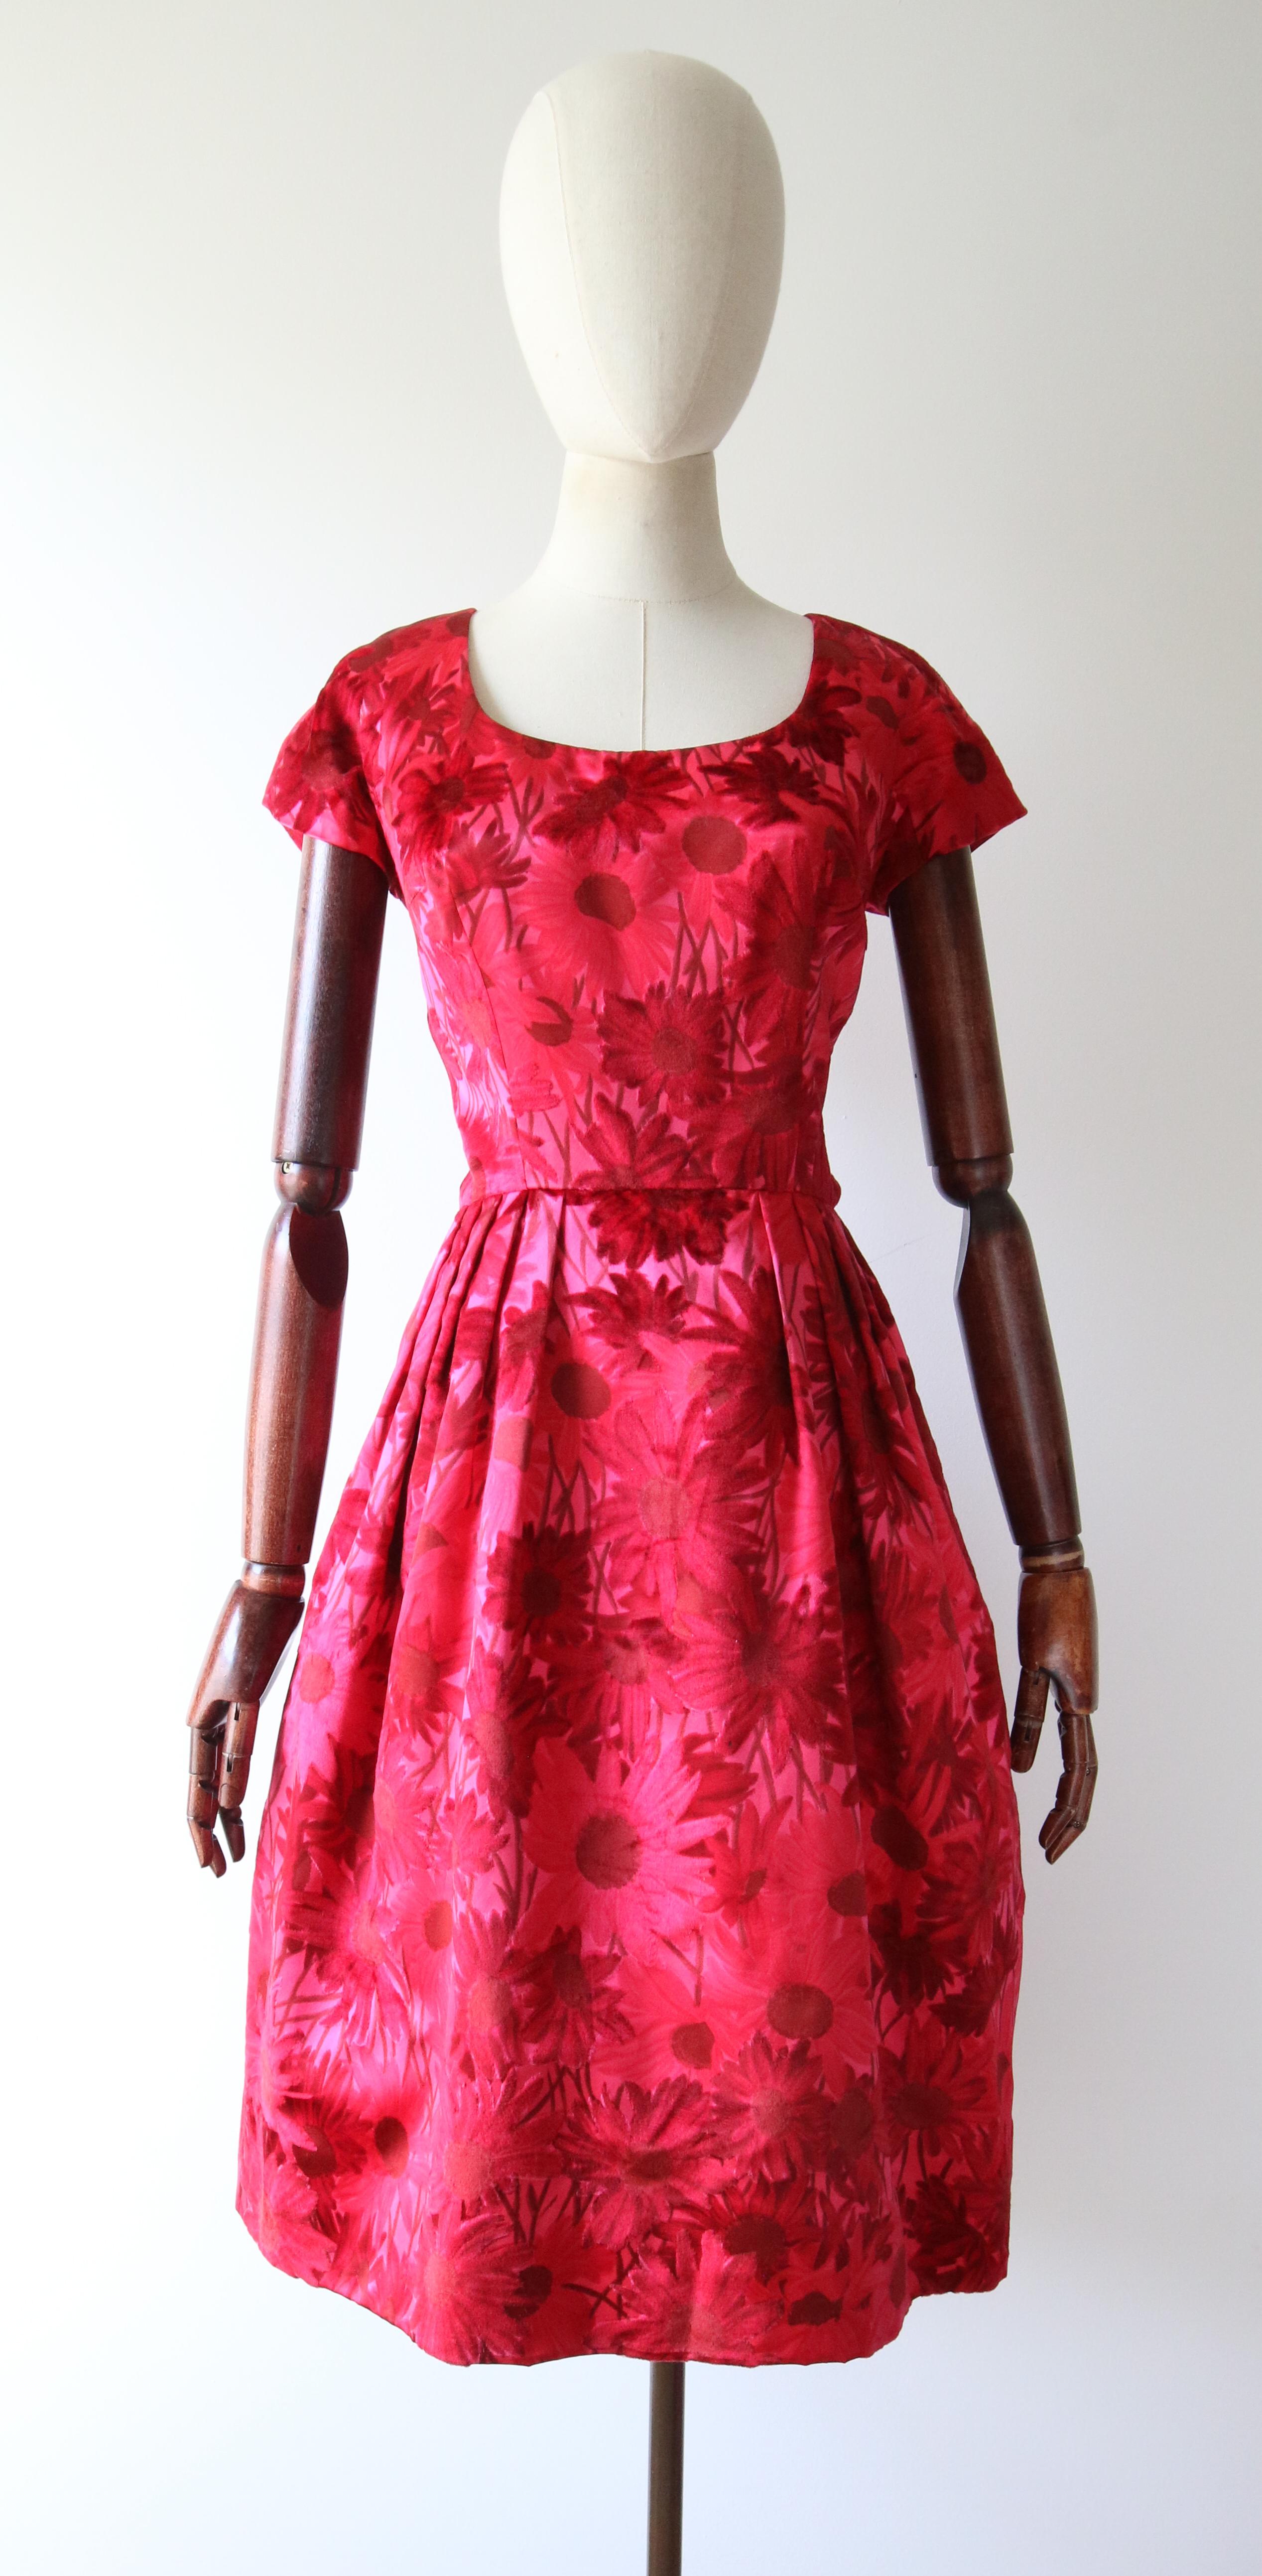 A gem to behold, this original 1950's satin dress, in shades of pink and red accented by silk velvet flocking details, in a pattern of wild daisies, is just the perfect piece for your vintage collection.

The rounded neckline of the dress is framed